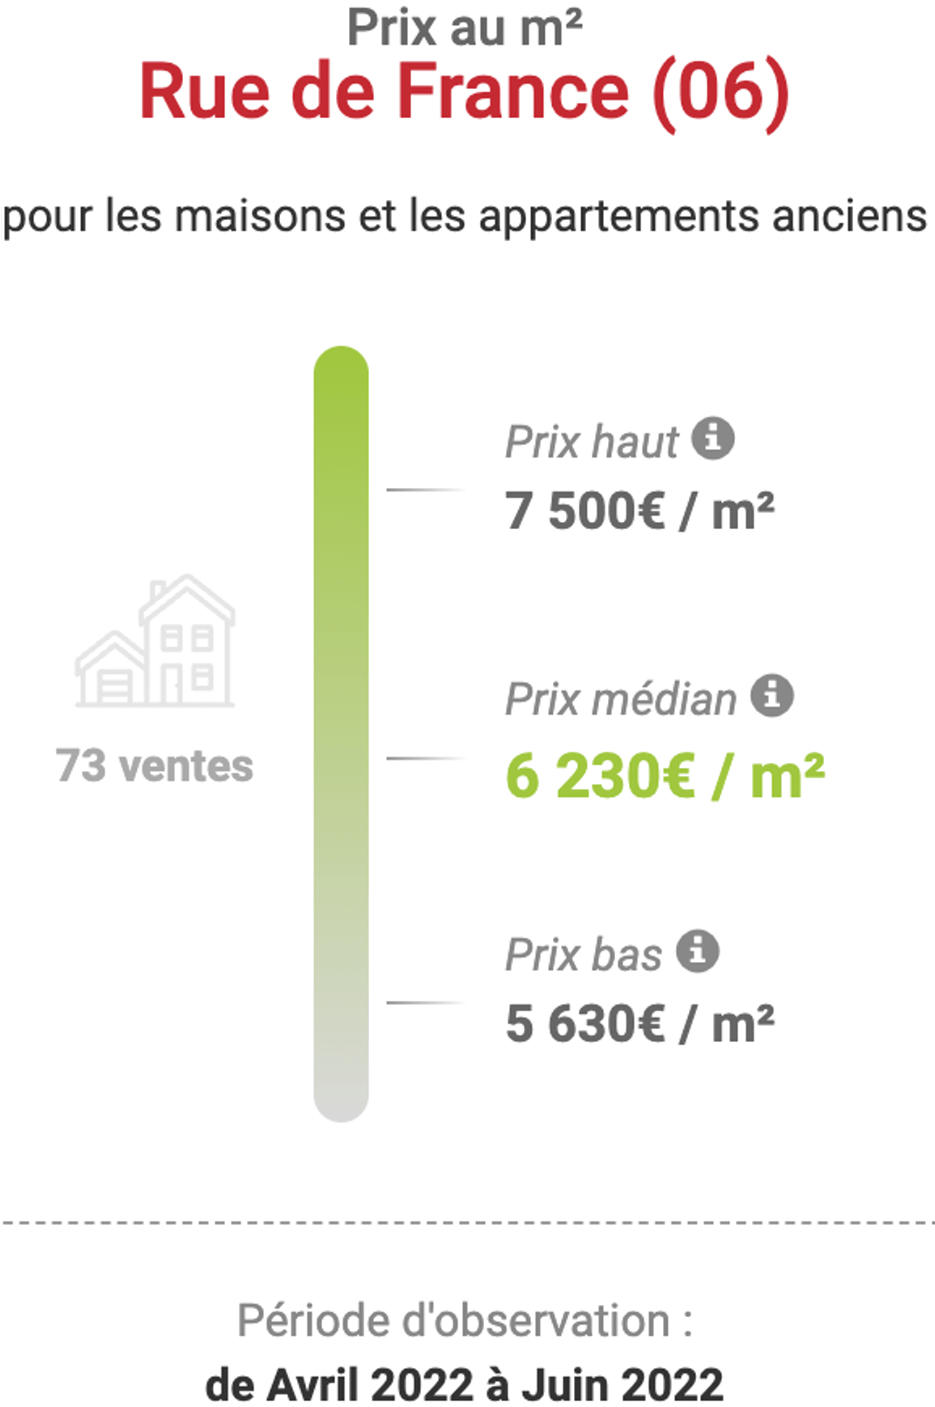 Graphic showing real estate prices from low to high in the rue de France neighborhood in Nice